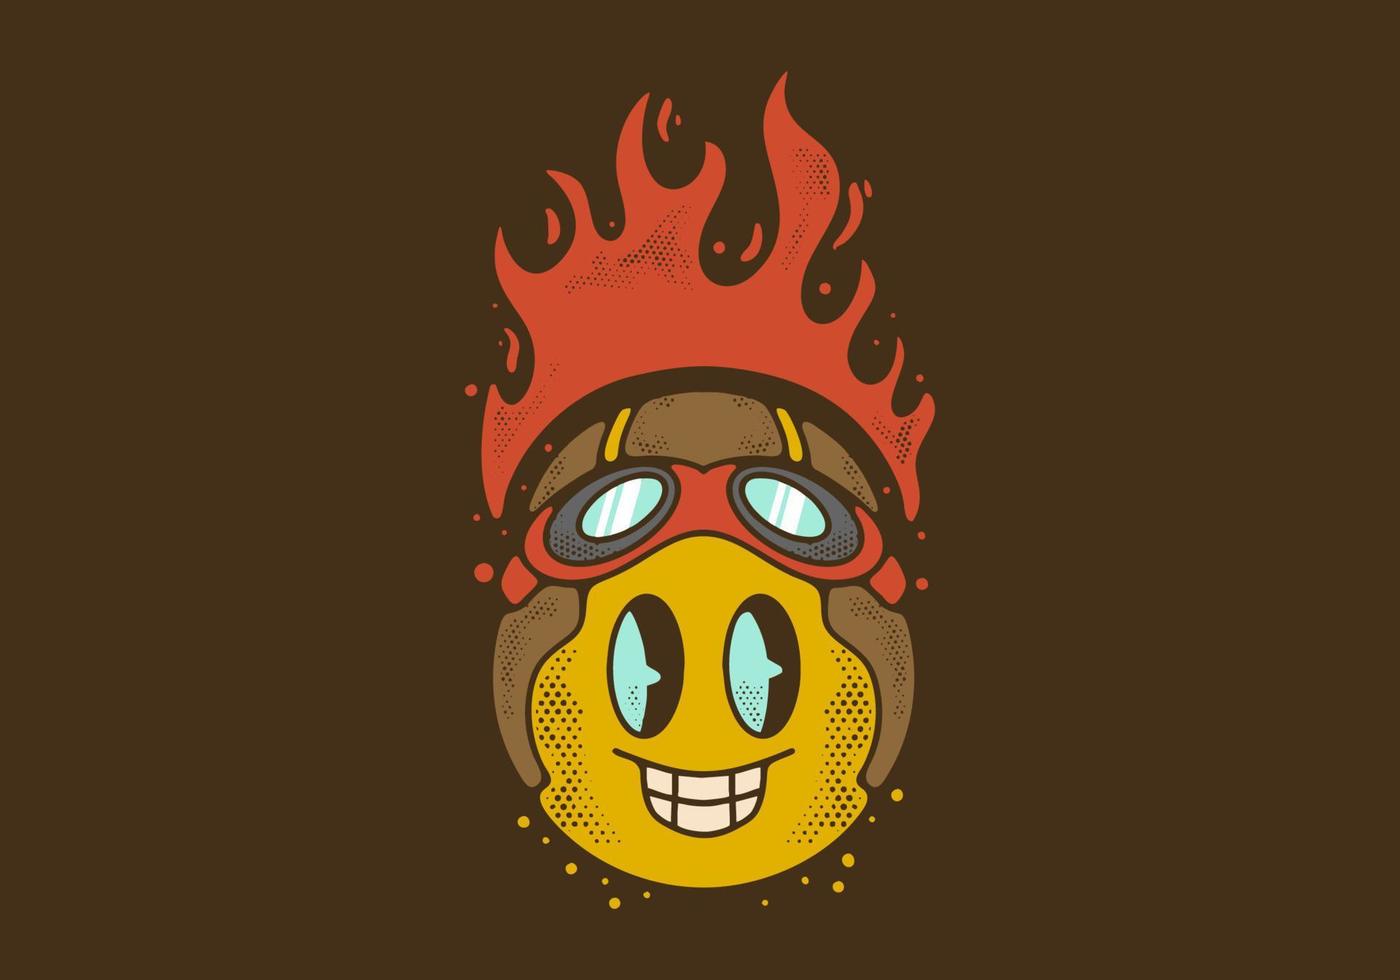 Vintage art illustration of yellow ball character wearing pilot helmet with fire flames vector